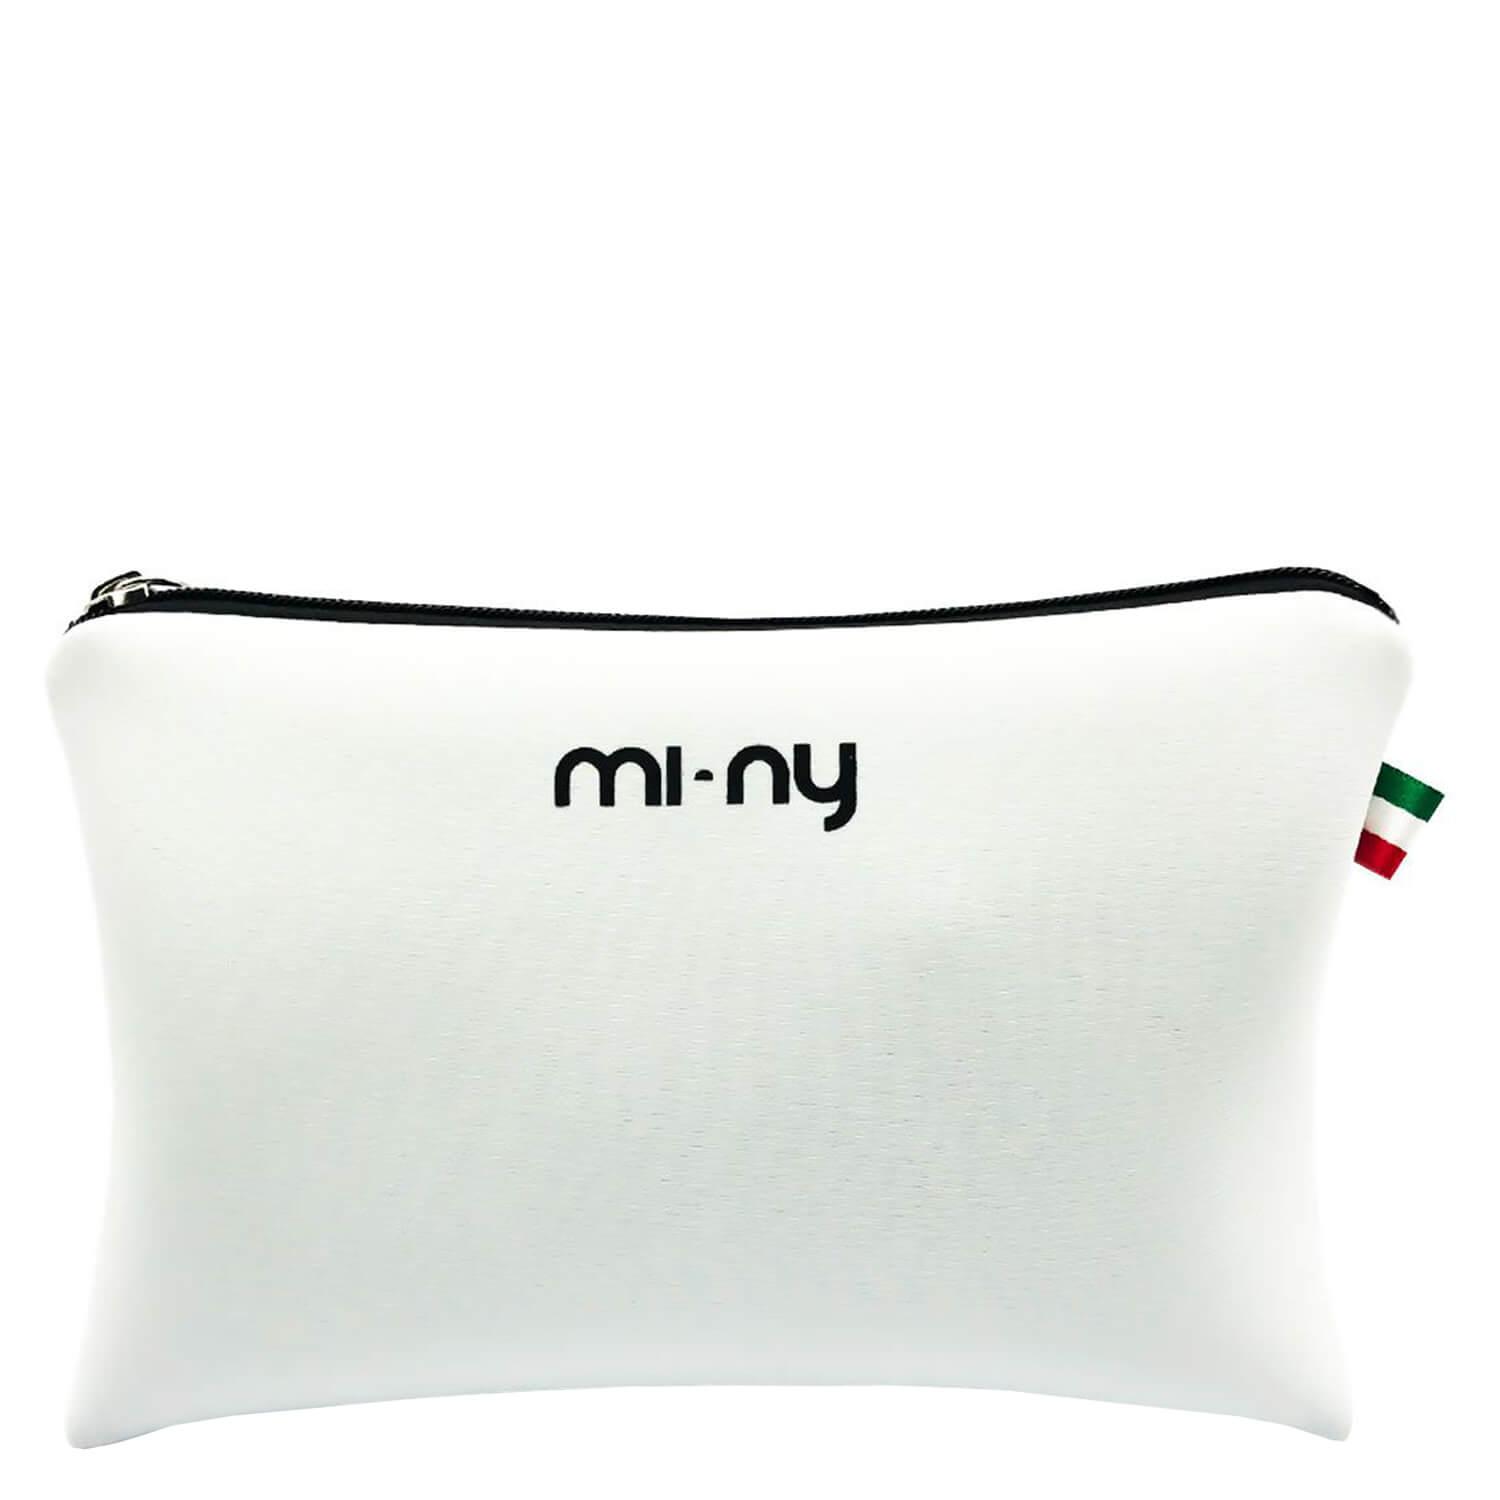 mi-ny Accessories - Beauty Bag Weiss